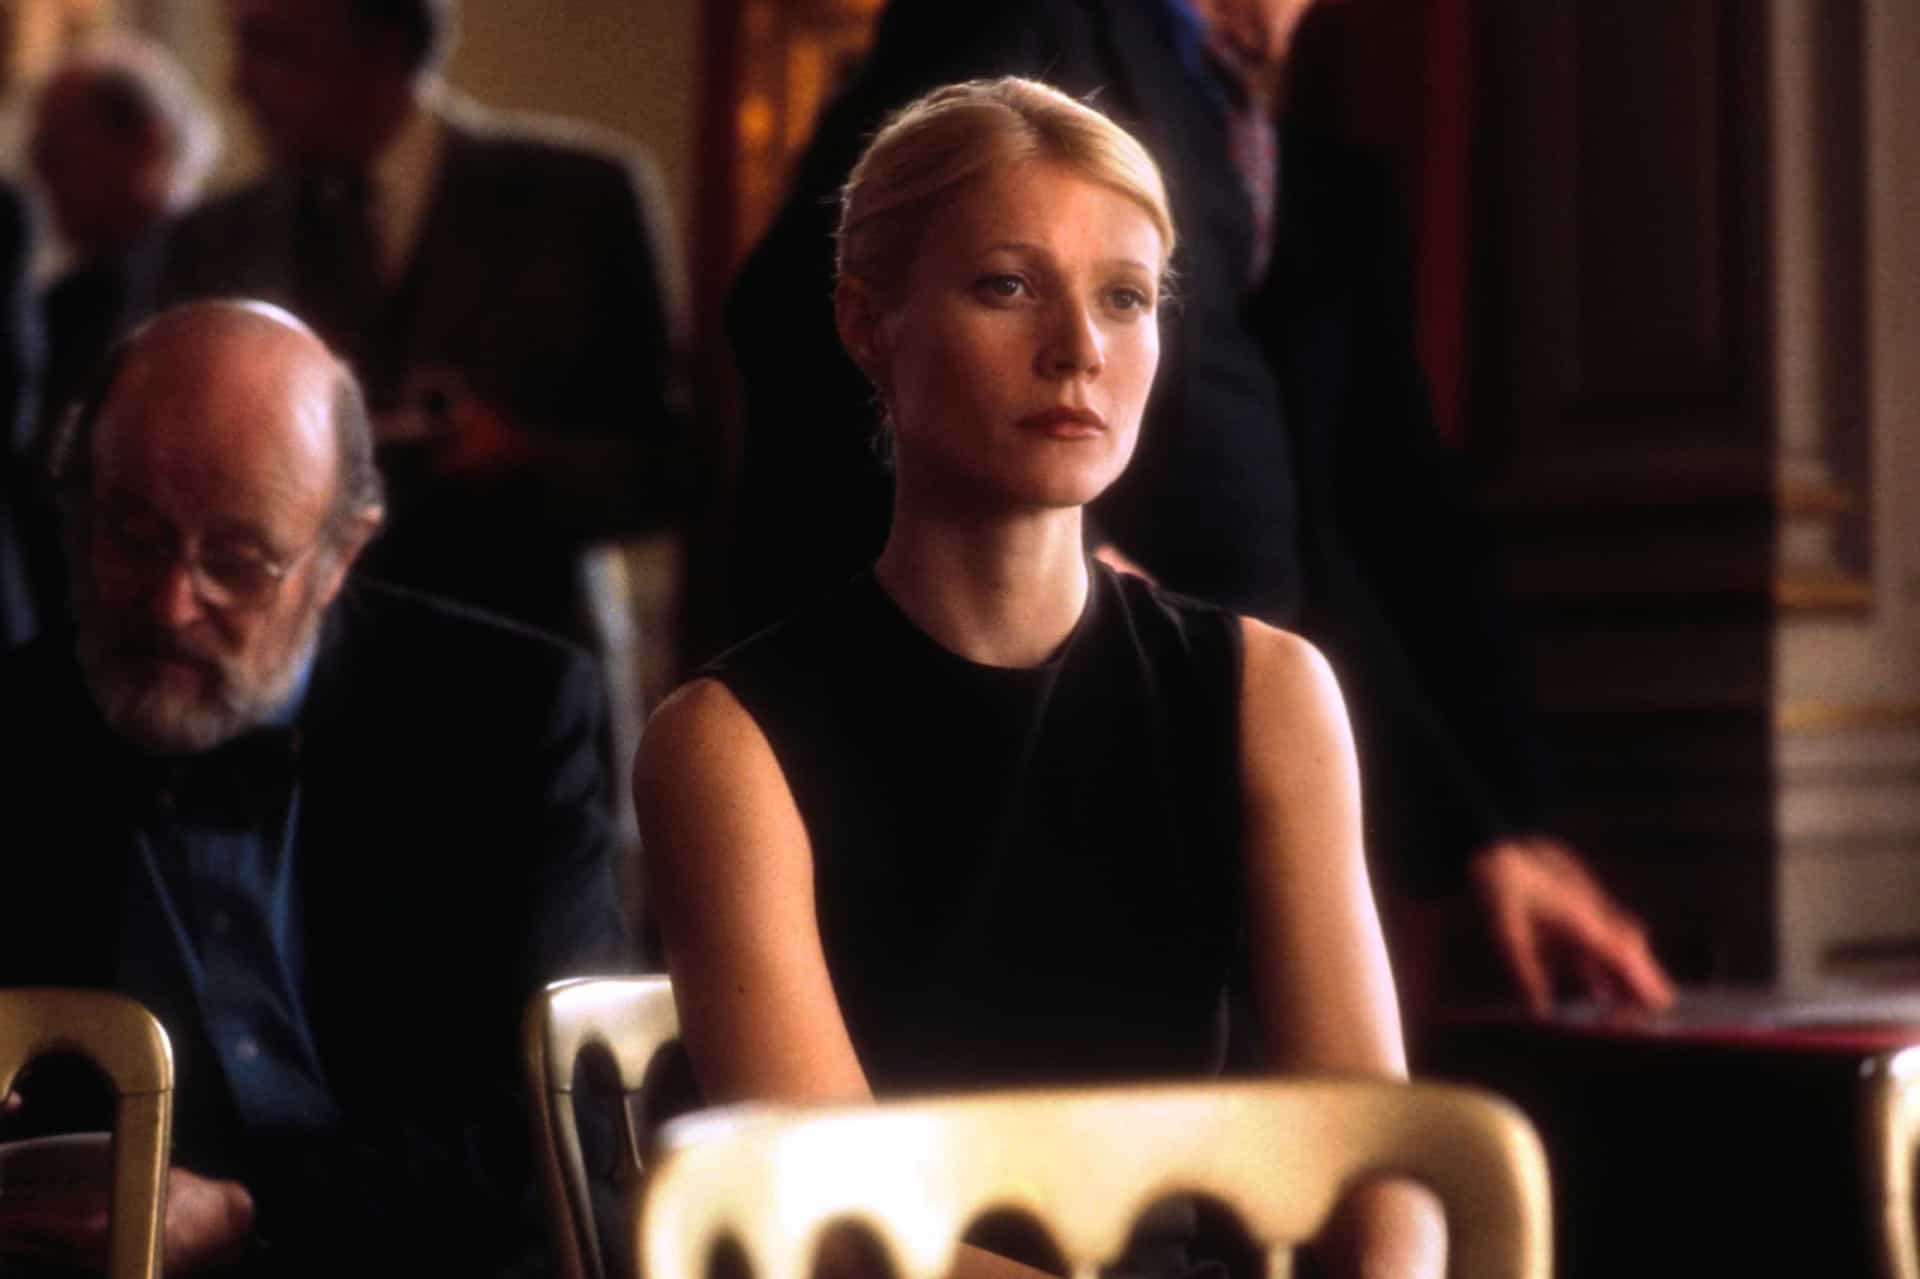 <p>Fast forward to 2002 and we have this romantic drama starring Gwyneth Paltrow and Aaron Eckhart as two scholars studying Victorian poets.</p><p>You may also like:<a href="https://www.starsinsider.com/n/496127?utm_source=msn.com&utm_medium=display&utm_campaign=referral_description&utm_content=519875en-us"> The biggest hit songs from the '80s</a></p>